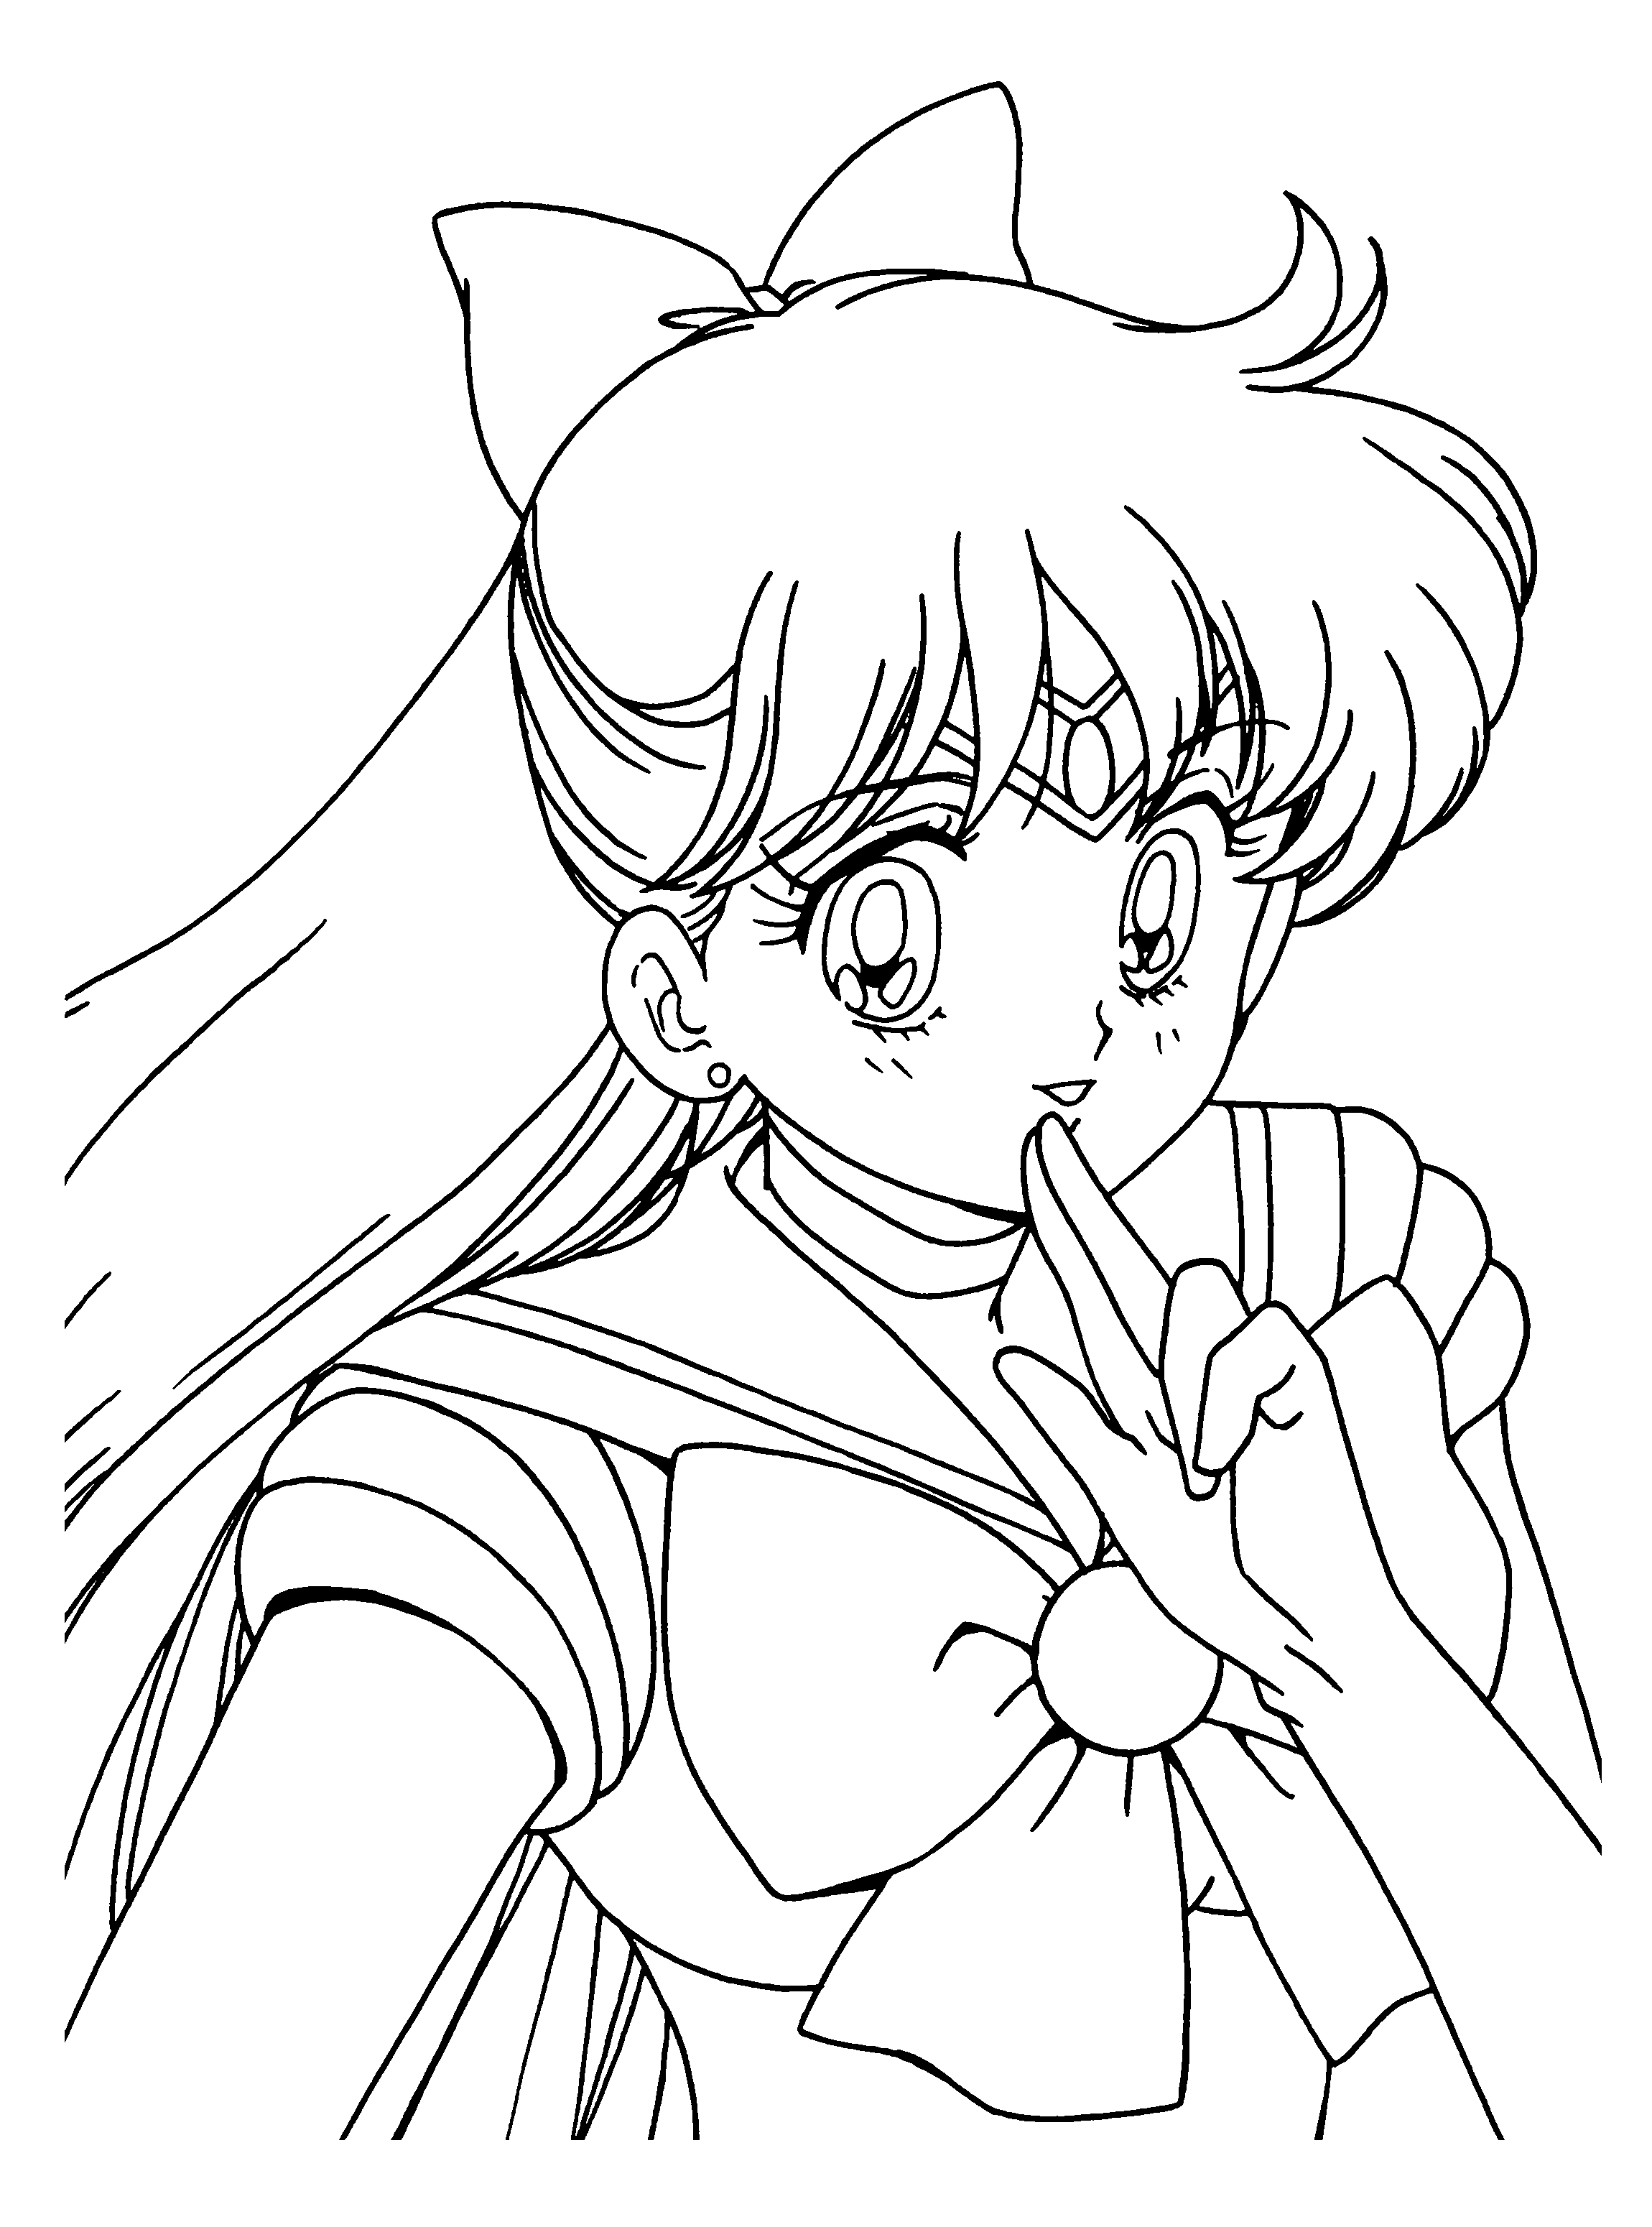 animated-coloring-pages-sailor-moon-image-0037